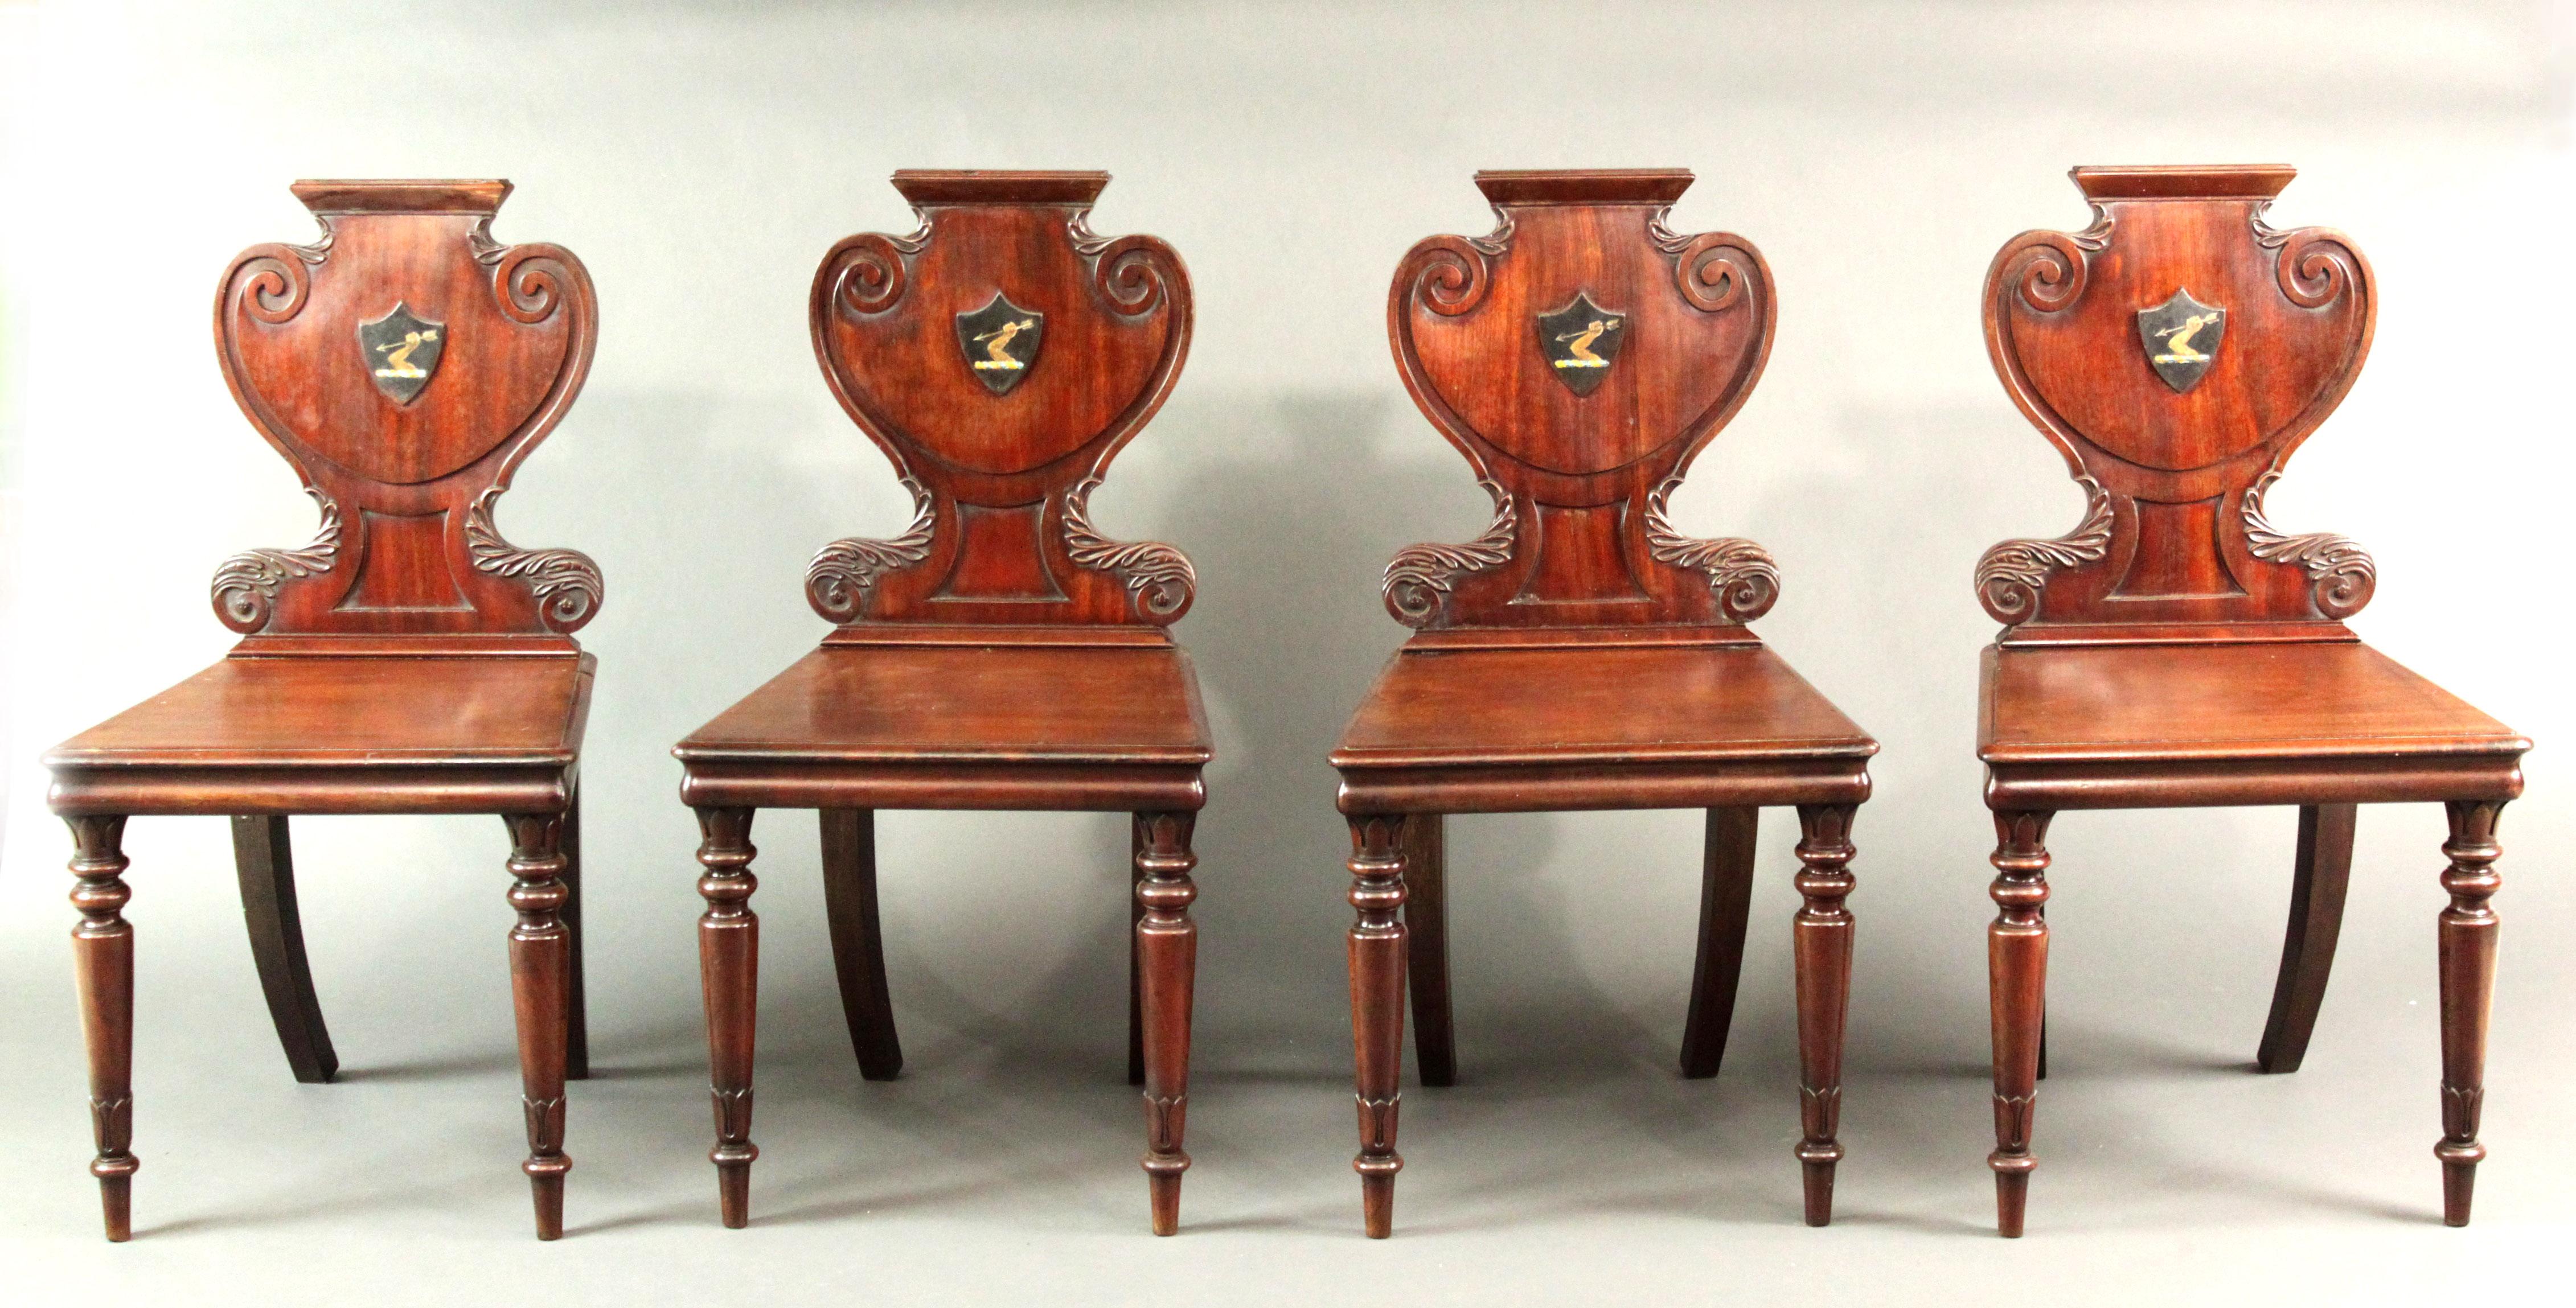 A good set of Regency hall chairs by Williams & Gibton of Dublin, in mahogany of the original color and patina, well carved backs and turned front legs.
The armorial is of an unclothed arm holding aloft an arrow and has a blue and yellow twisted